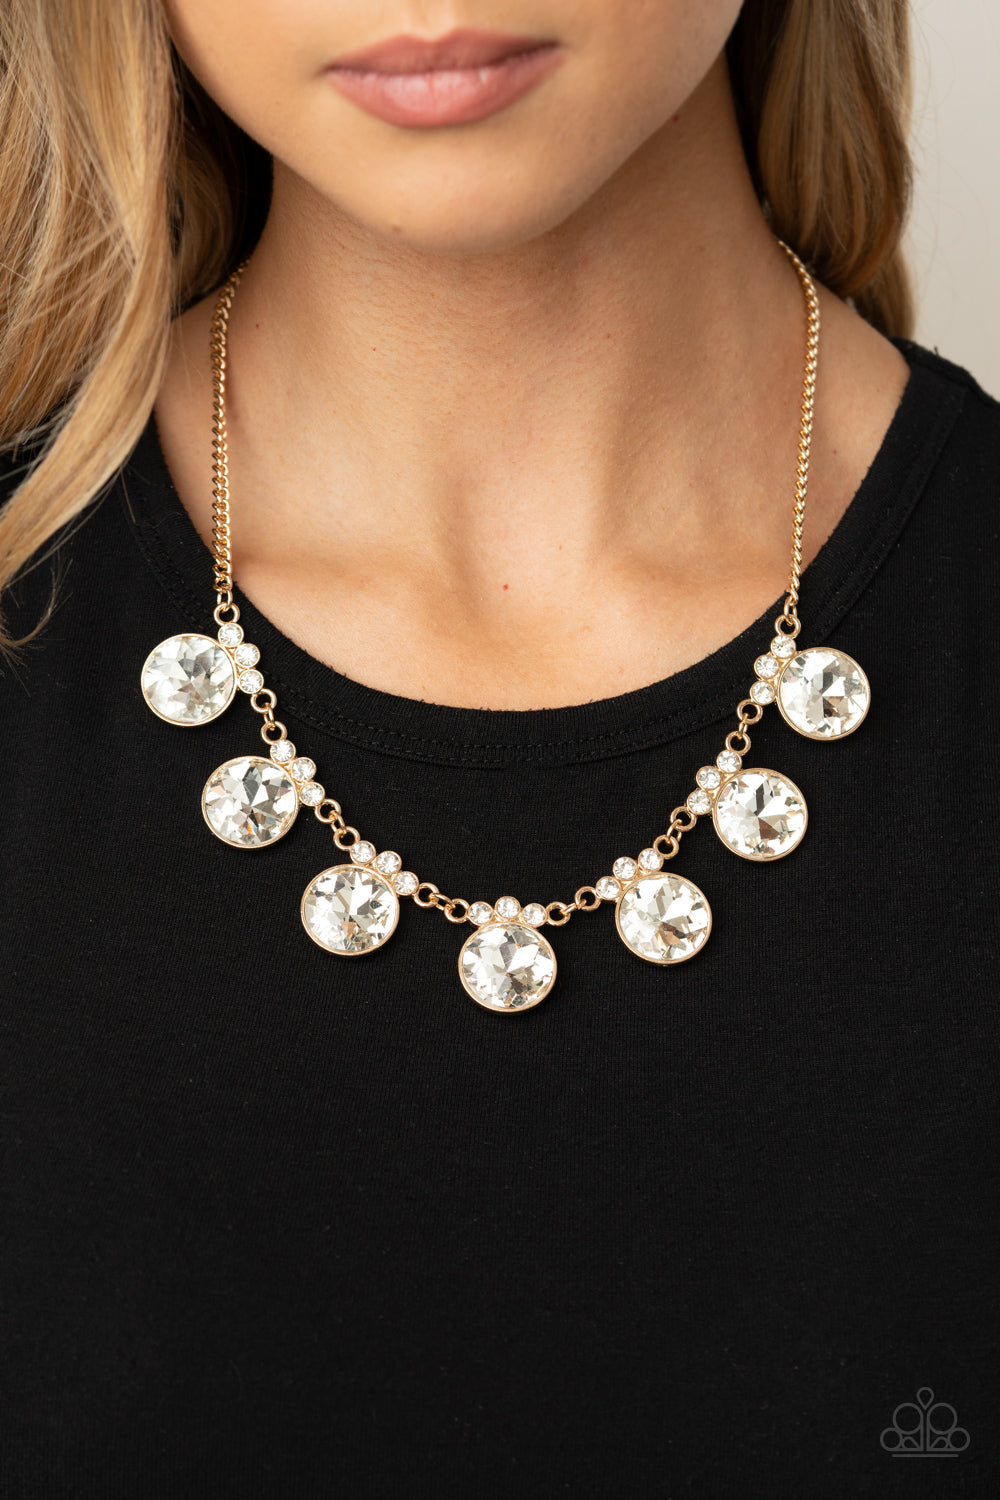 Paparazzi Necklace ~ GLOW-Getter Glamour - Gold Necklace with Oversized white gems